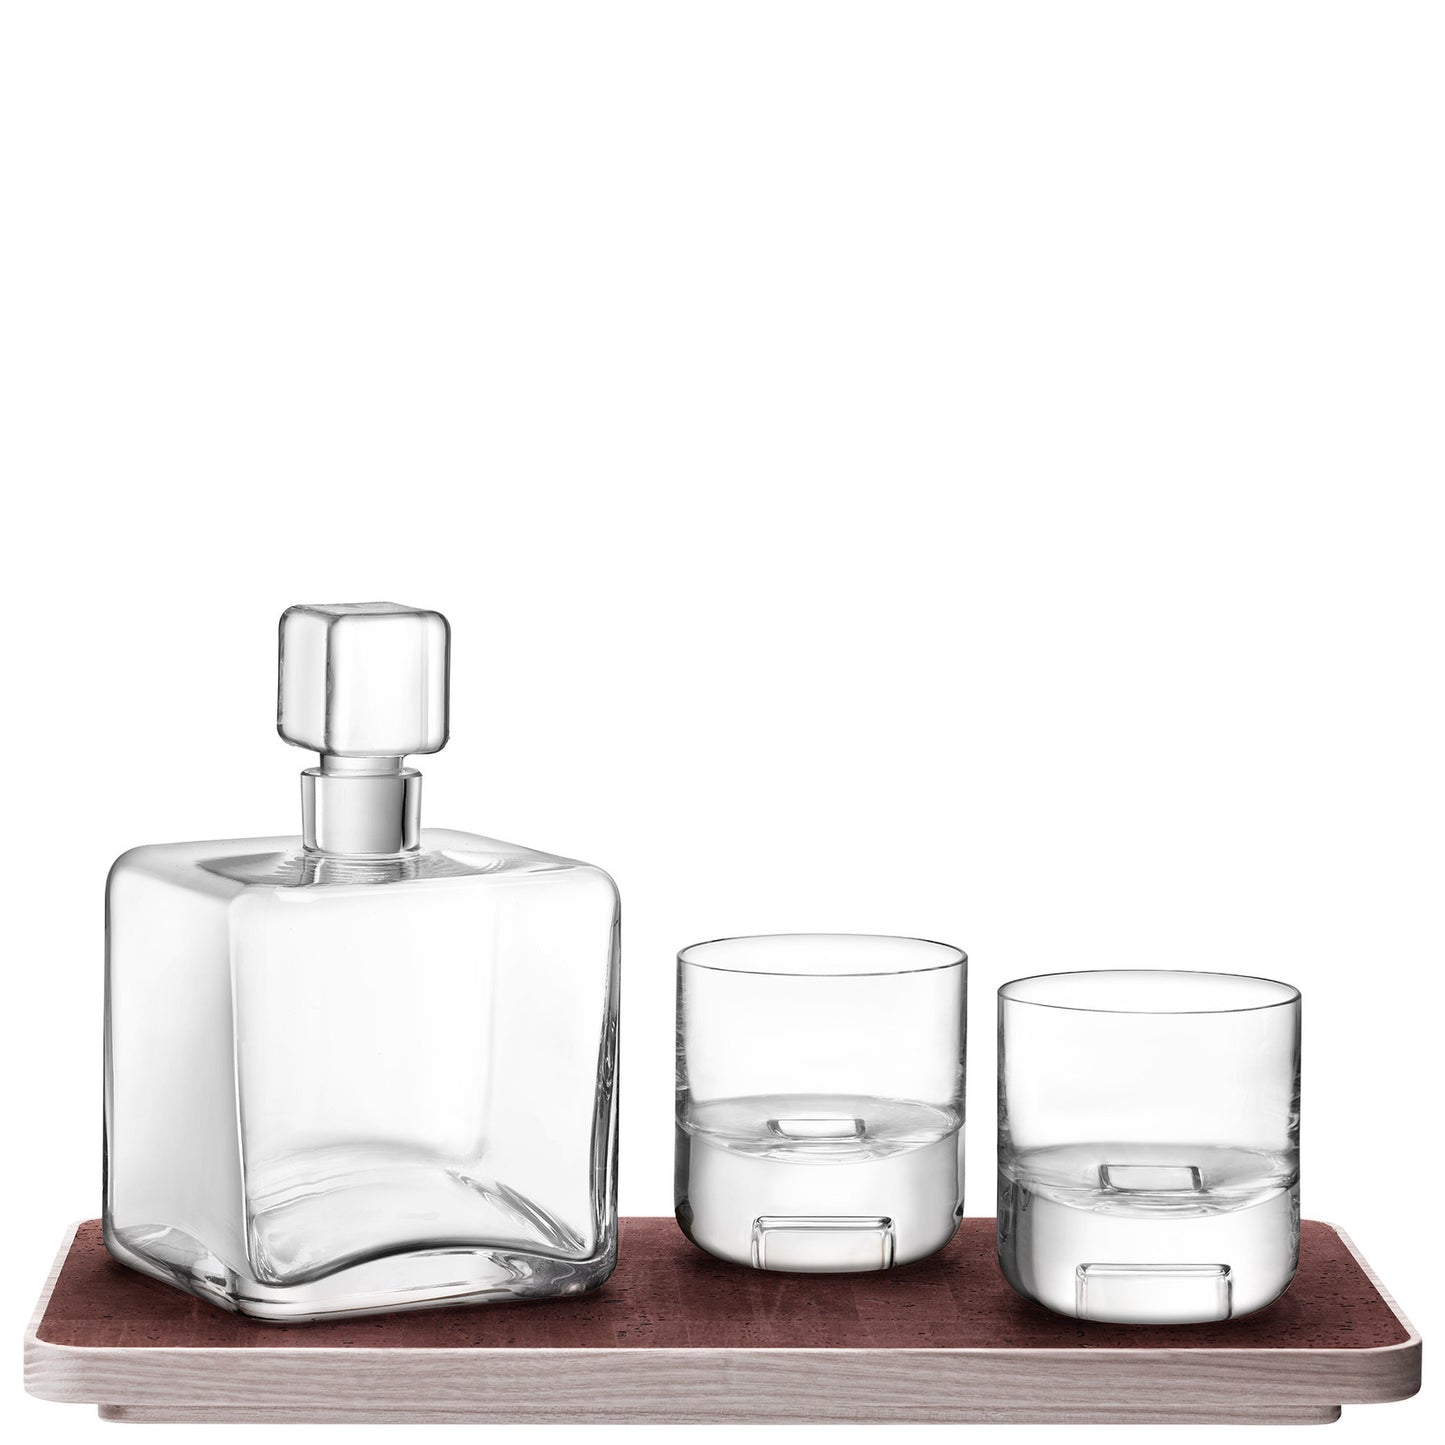 Cask Whisky Decanter, Square